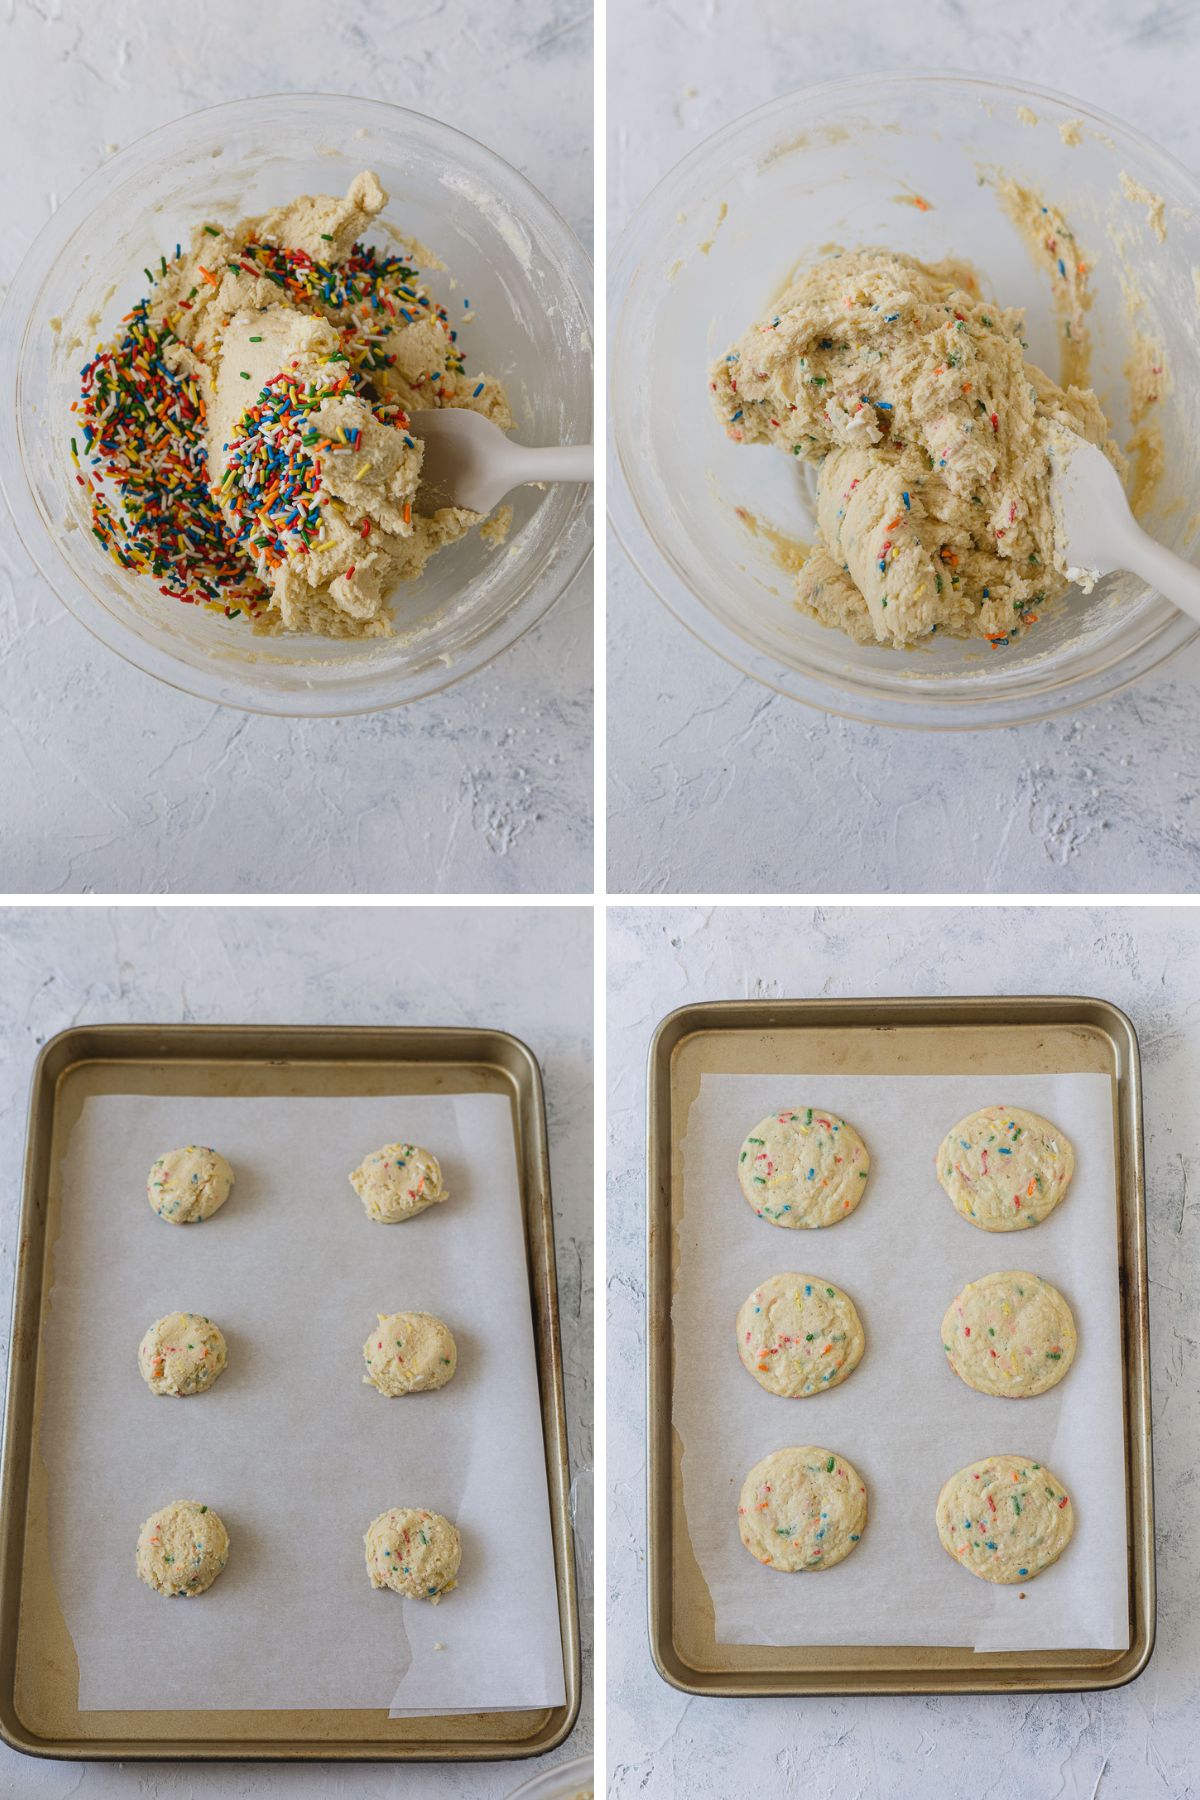 Mixing sprinkles into sugar cookie dough and shaping and baking cookies.